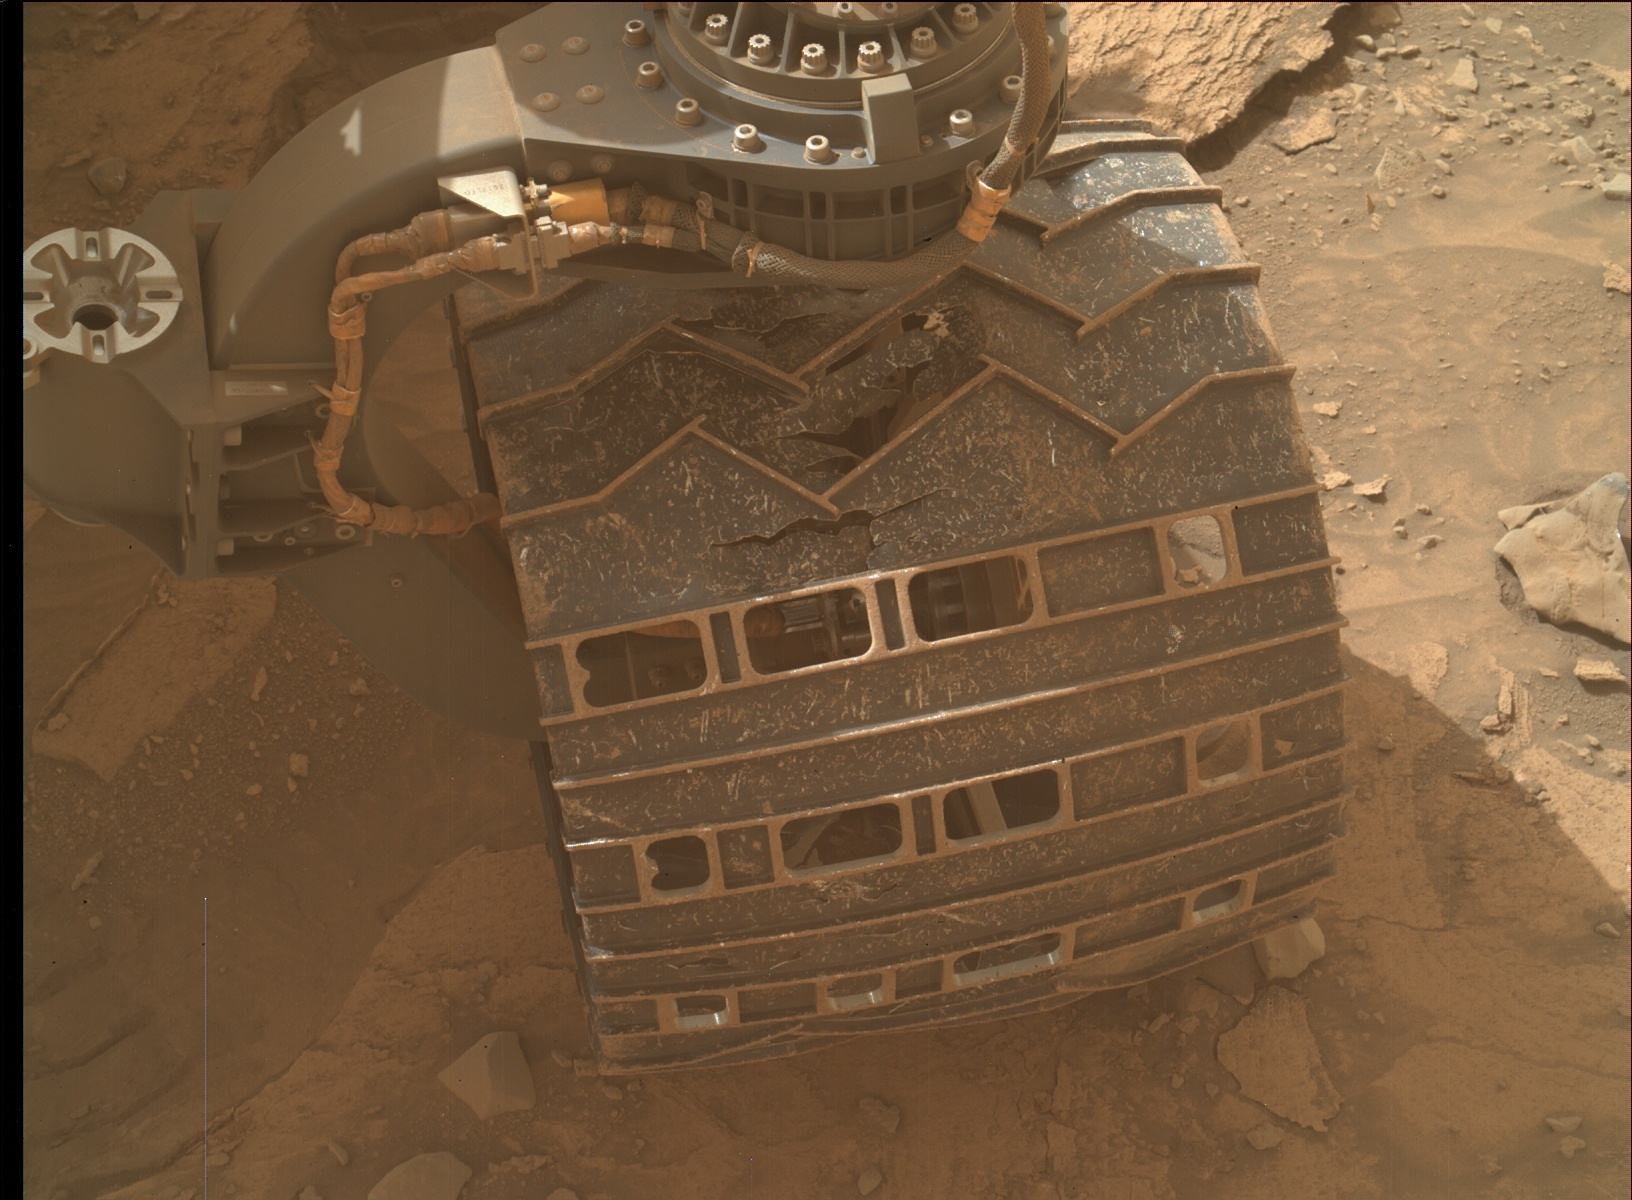 A wheel of the Mars Curiosity rover showing damage from rugged terrain